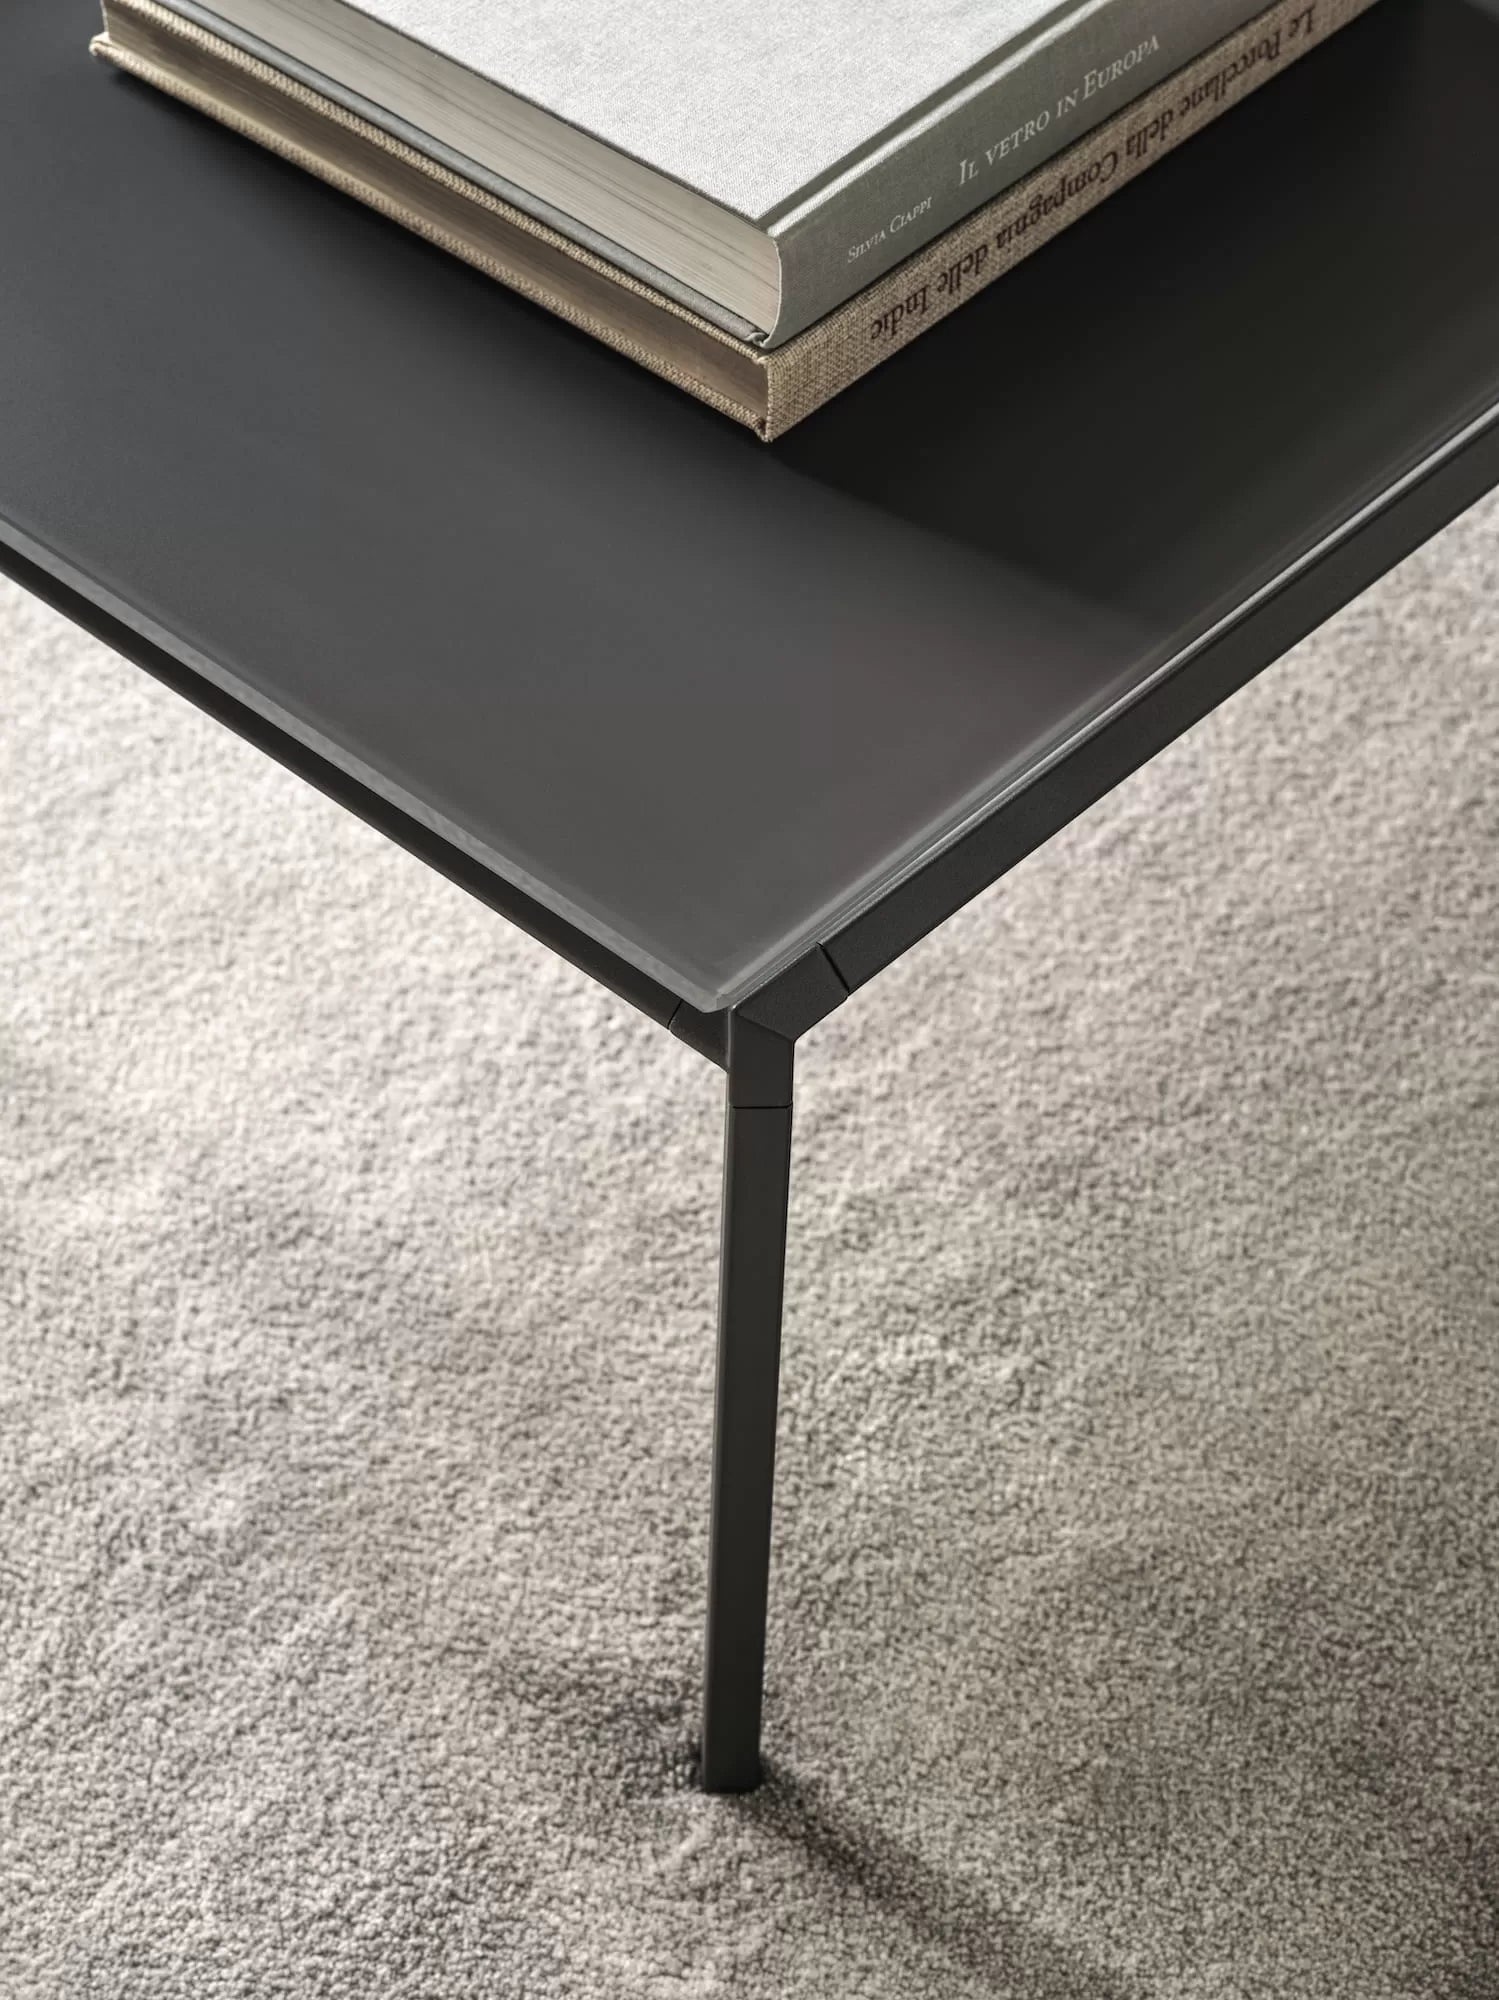 Diagonal Coffee Table With Lacquered Metal Frame 06 02